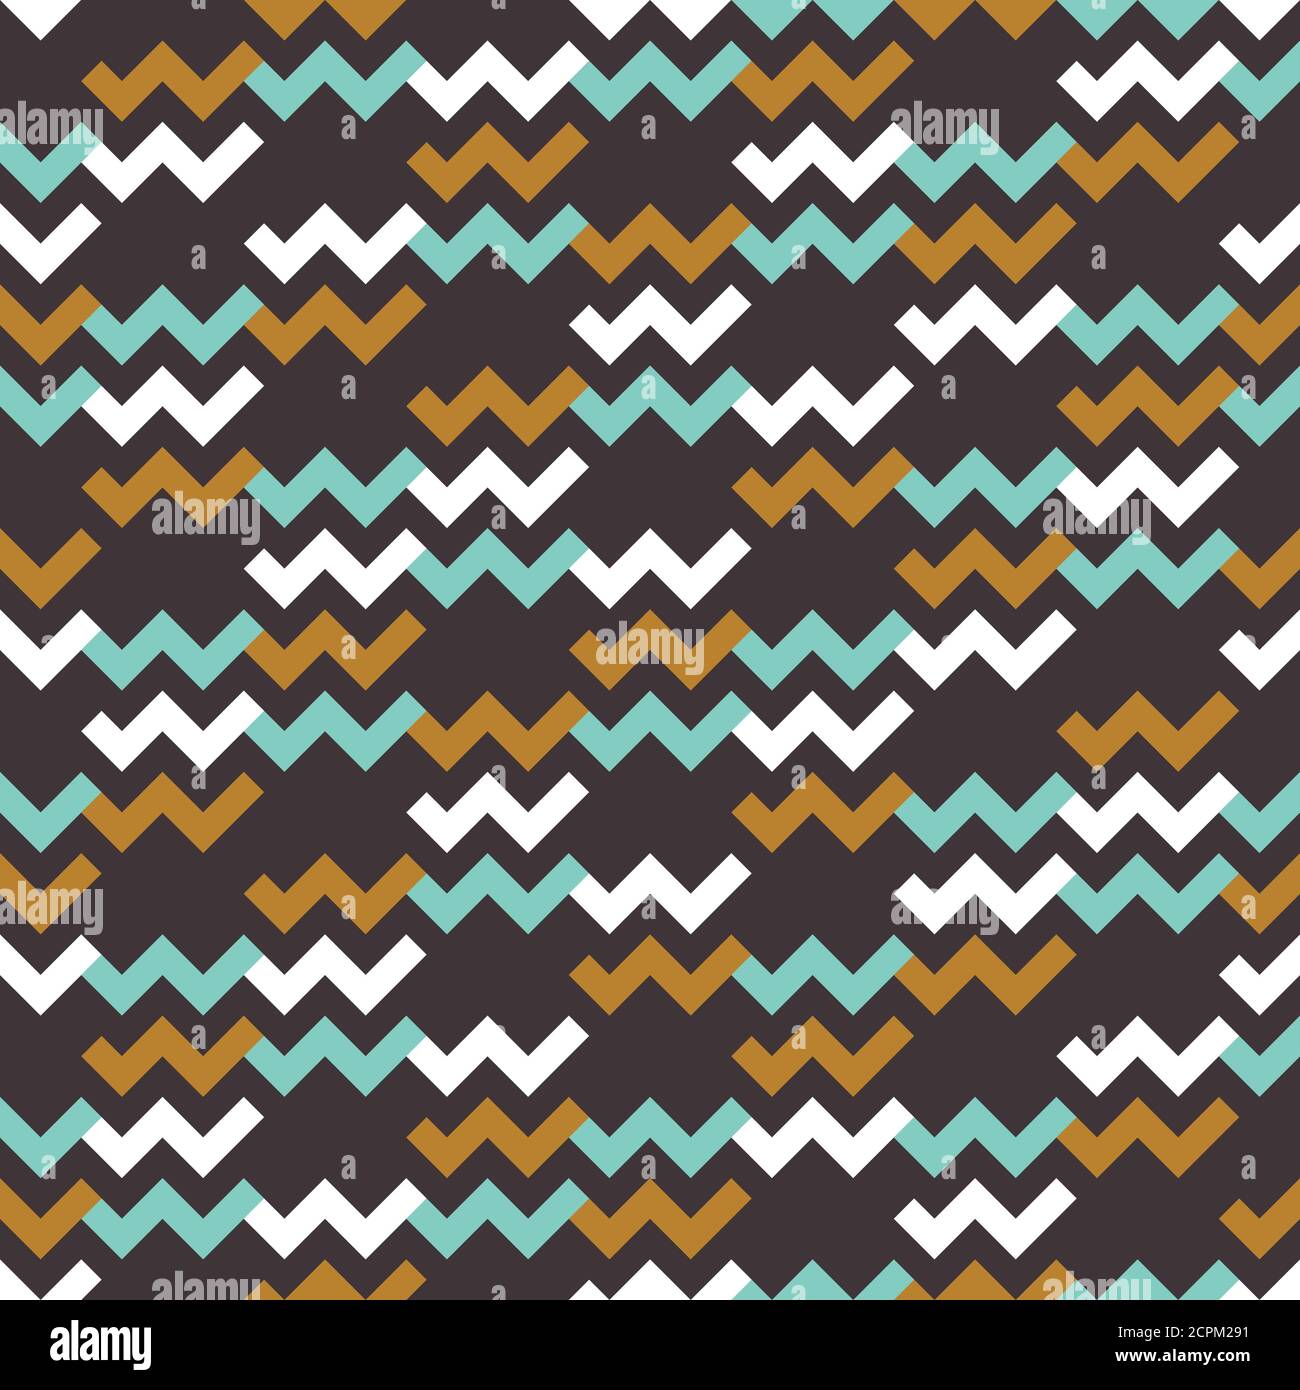 Seamless geometric pattern with zigzags. Can be used in textiles, for book design, website background. Stock Vector